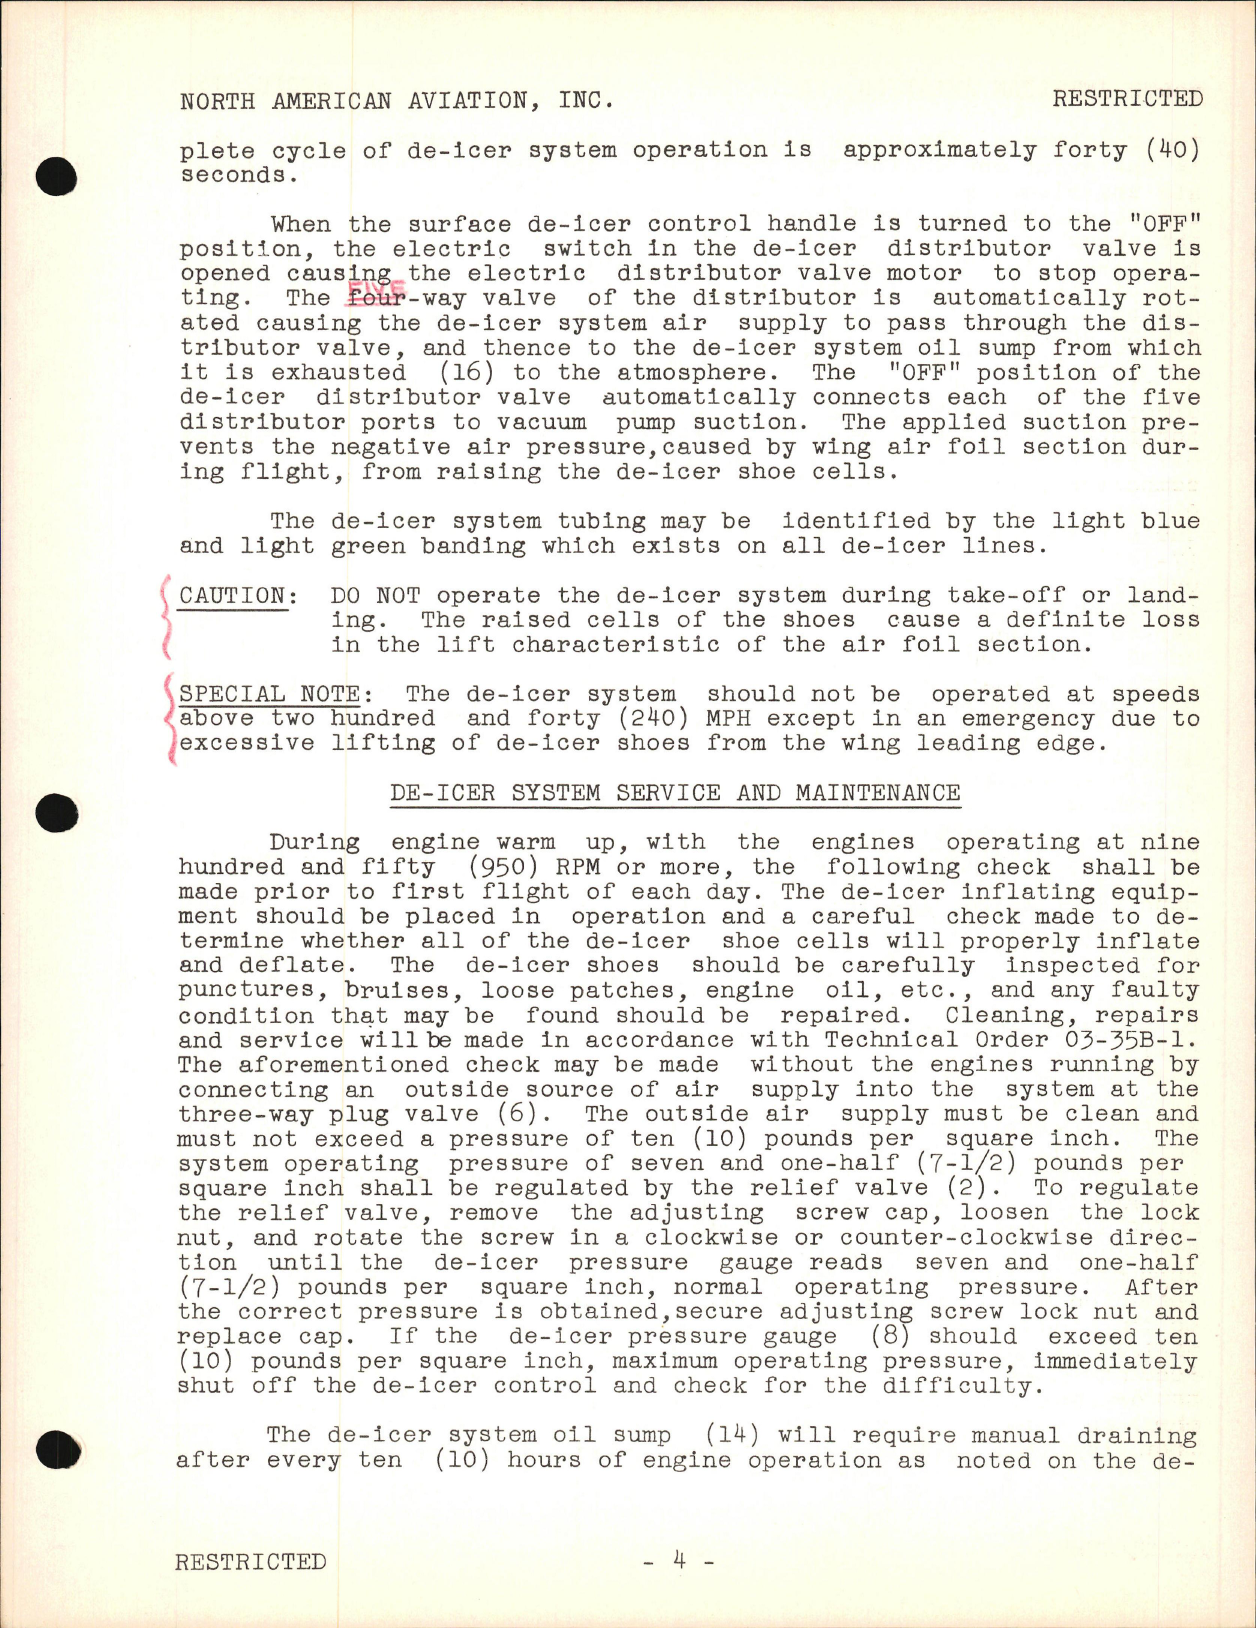 Sample page 7 from AirCorps Library document: Service School Lectures - De-Icer System